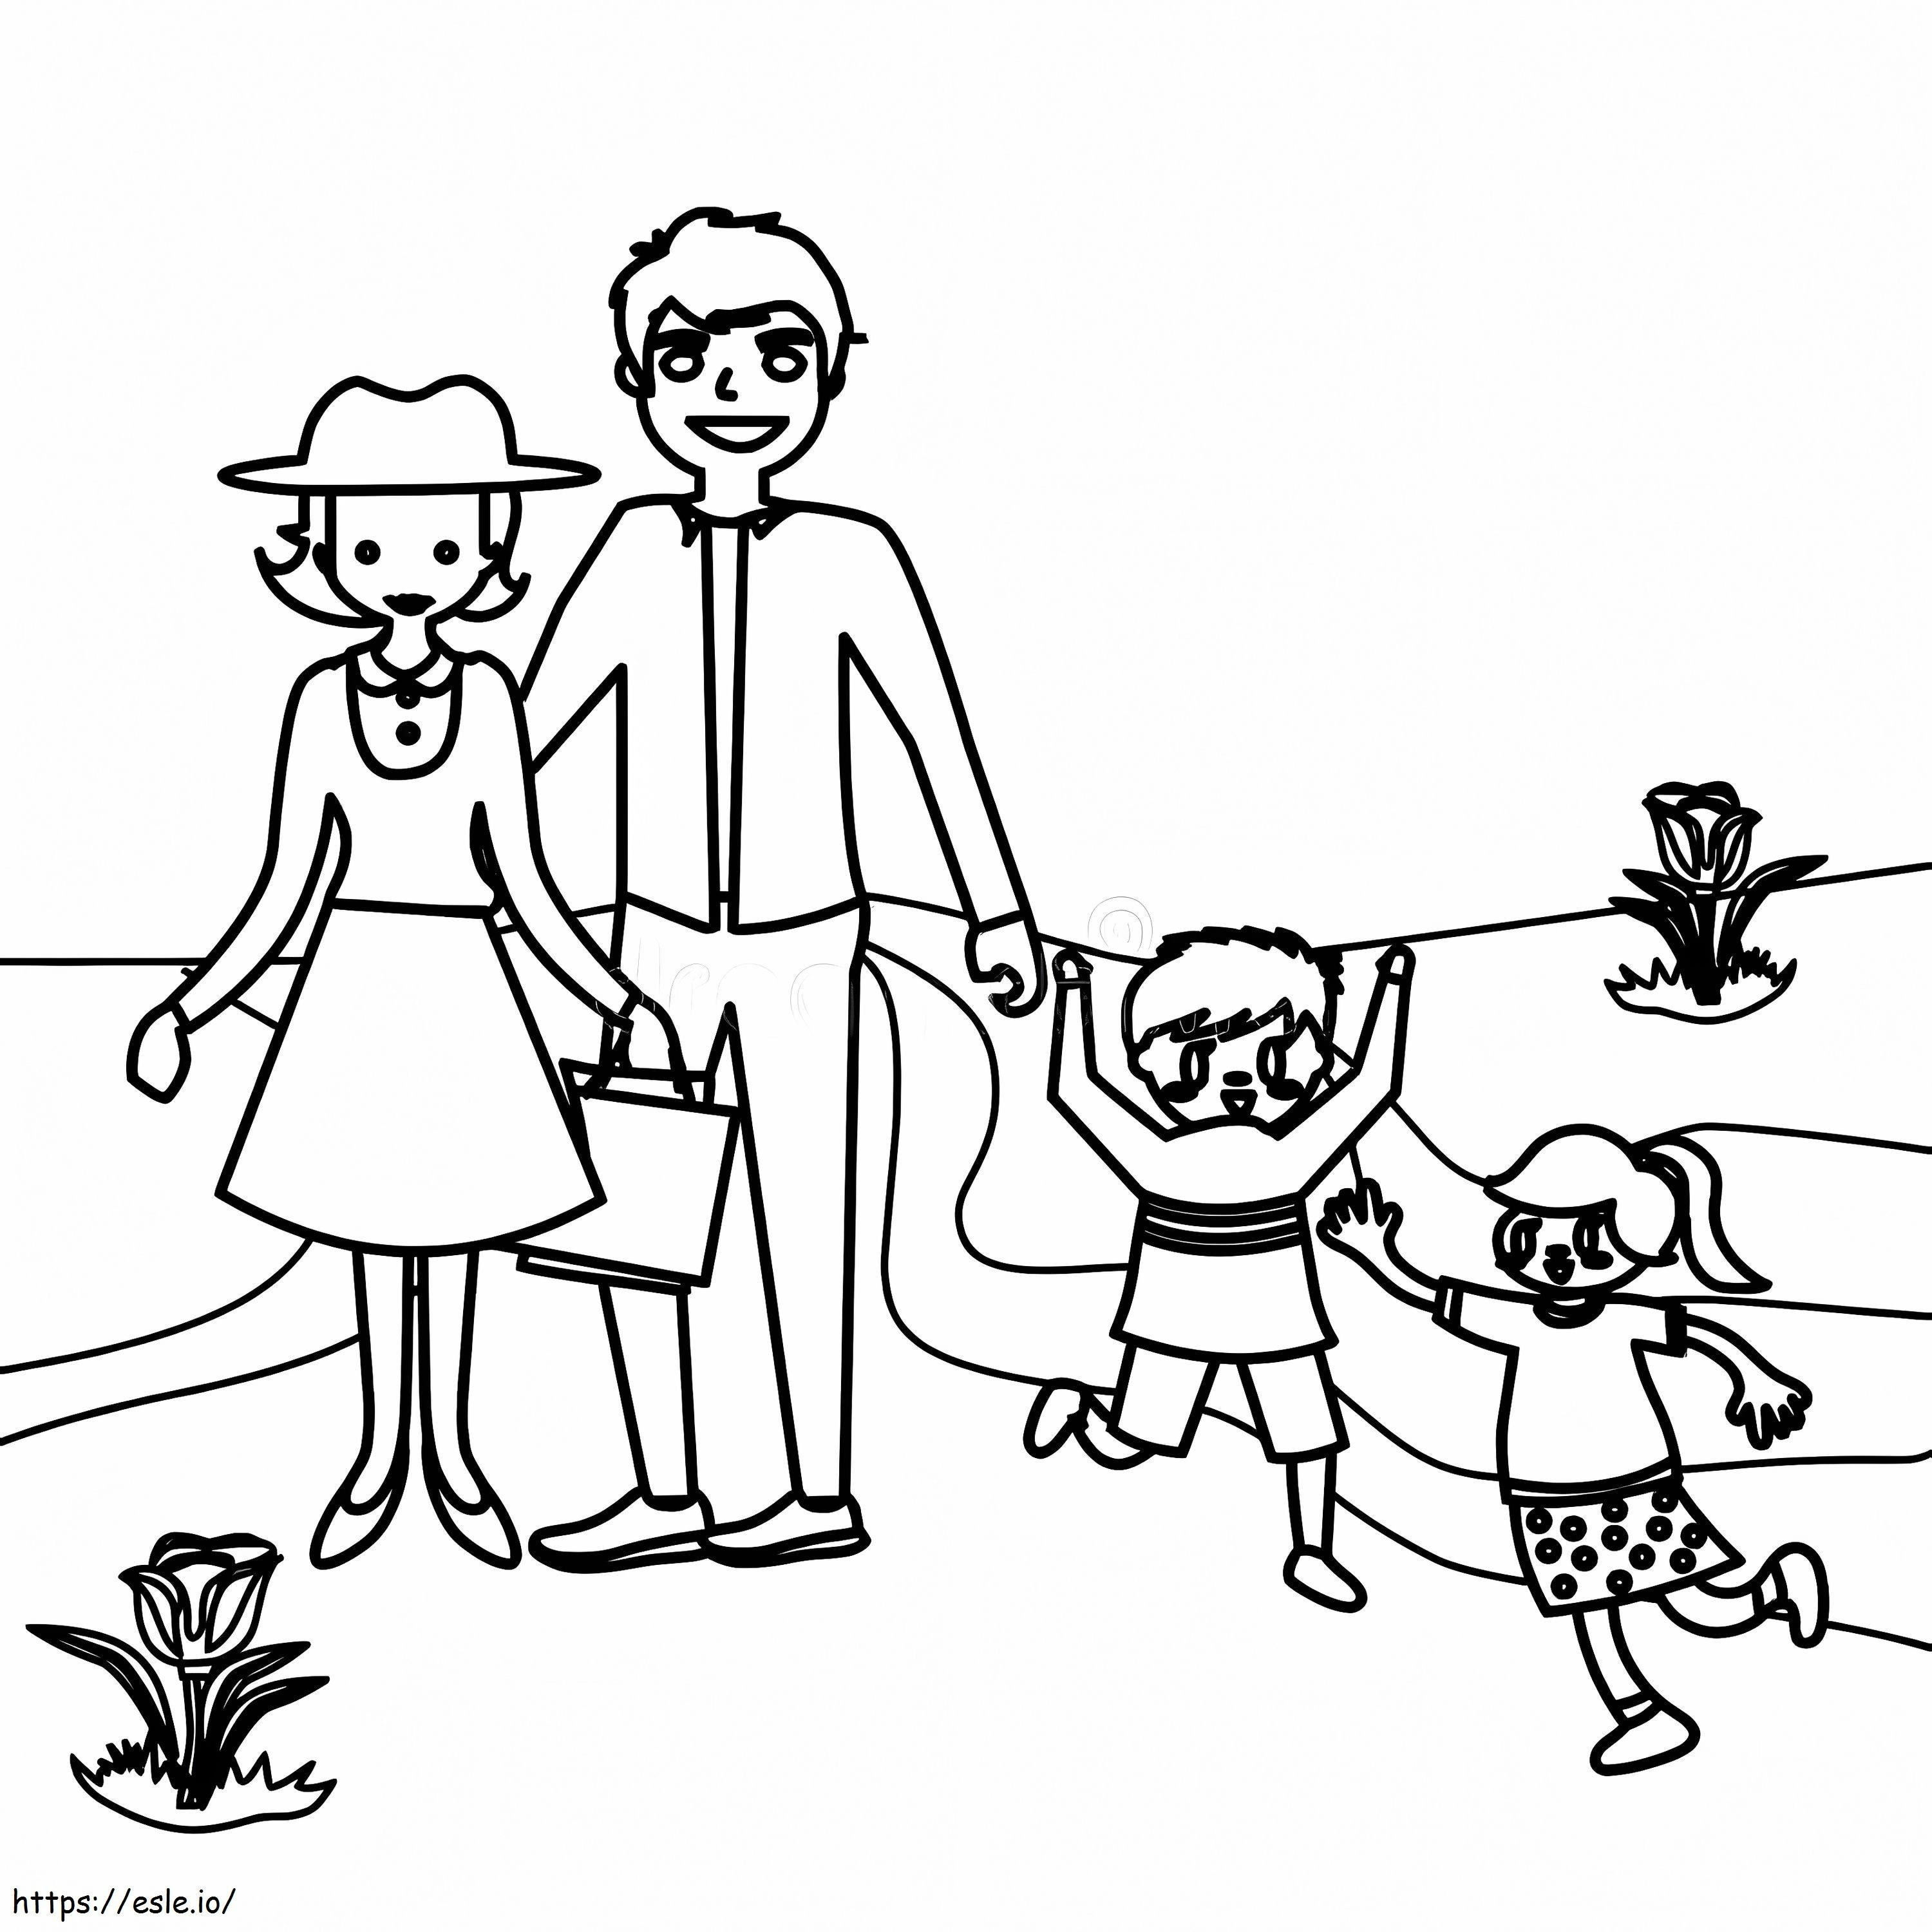 Normal Family coloring page